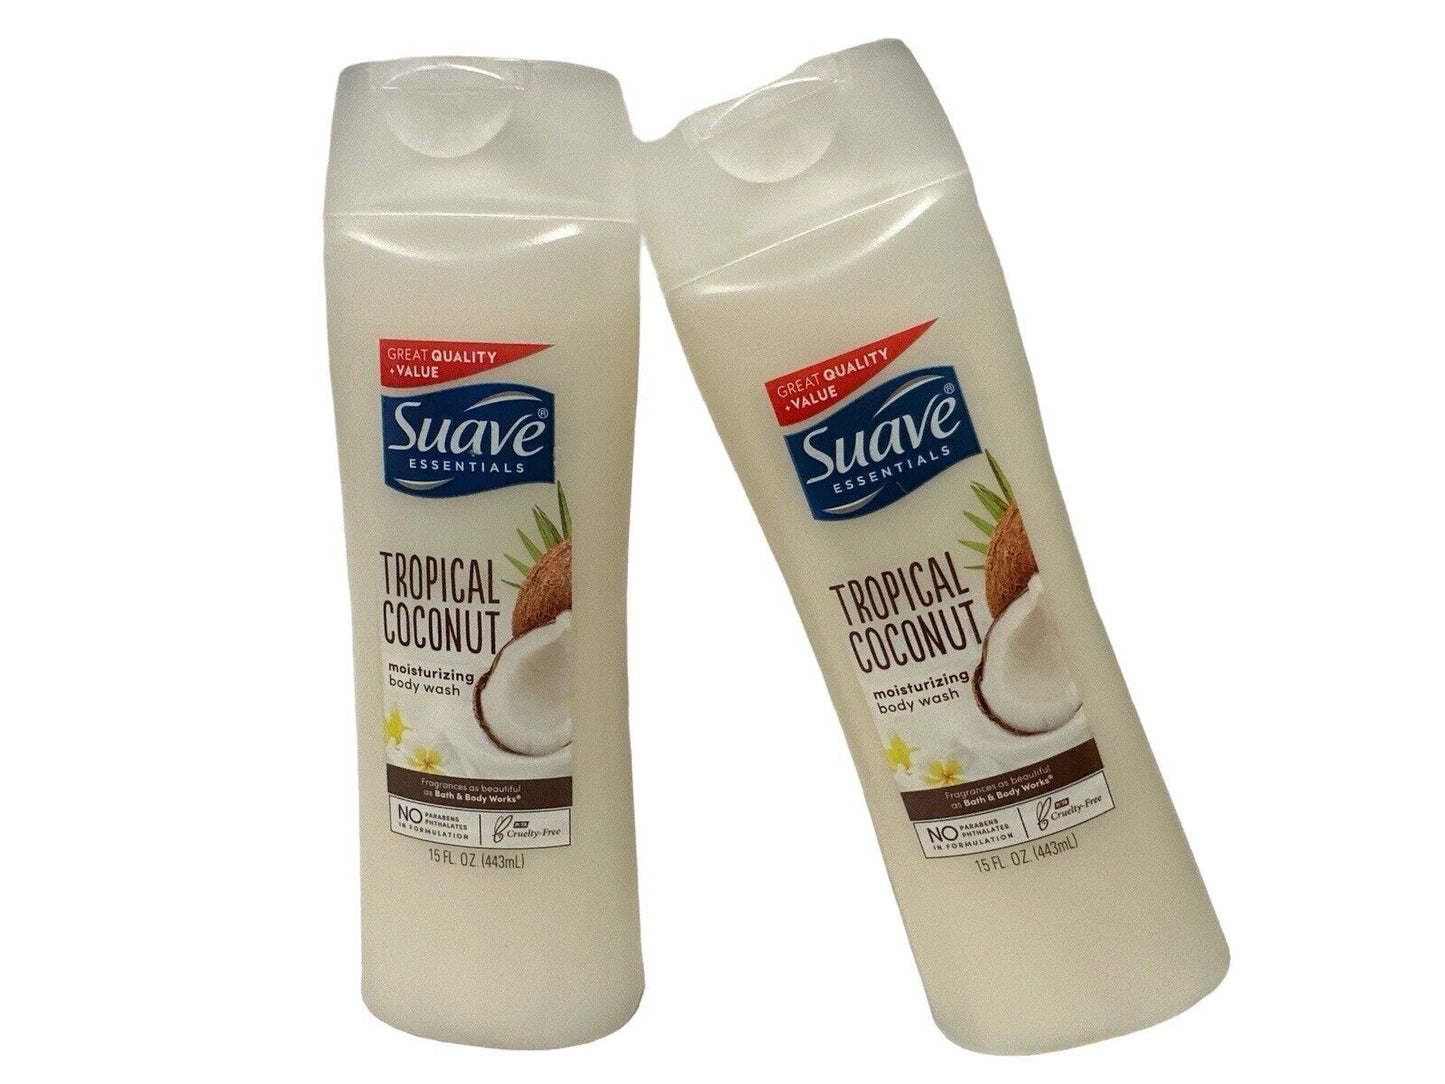 Suave Naturals Body Wash - Tropical Coconut, 15Oz - 2 Pack